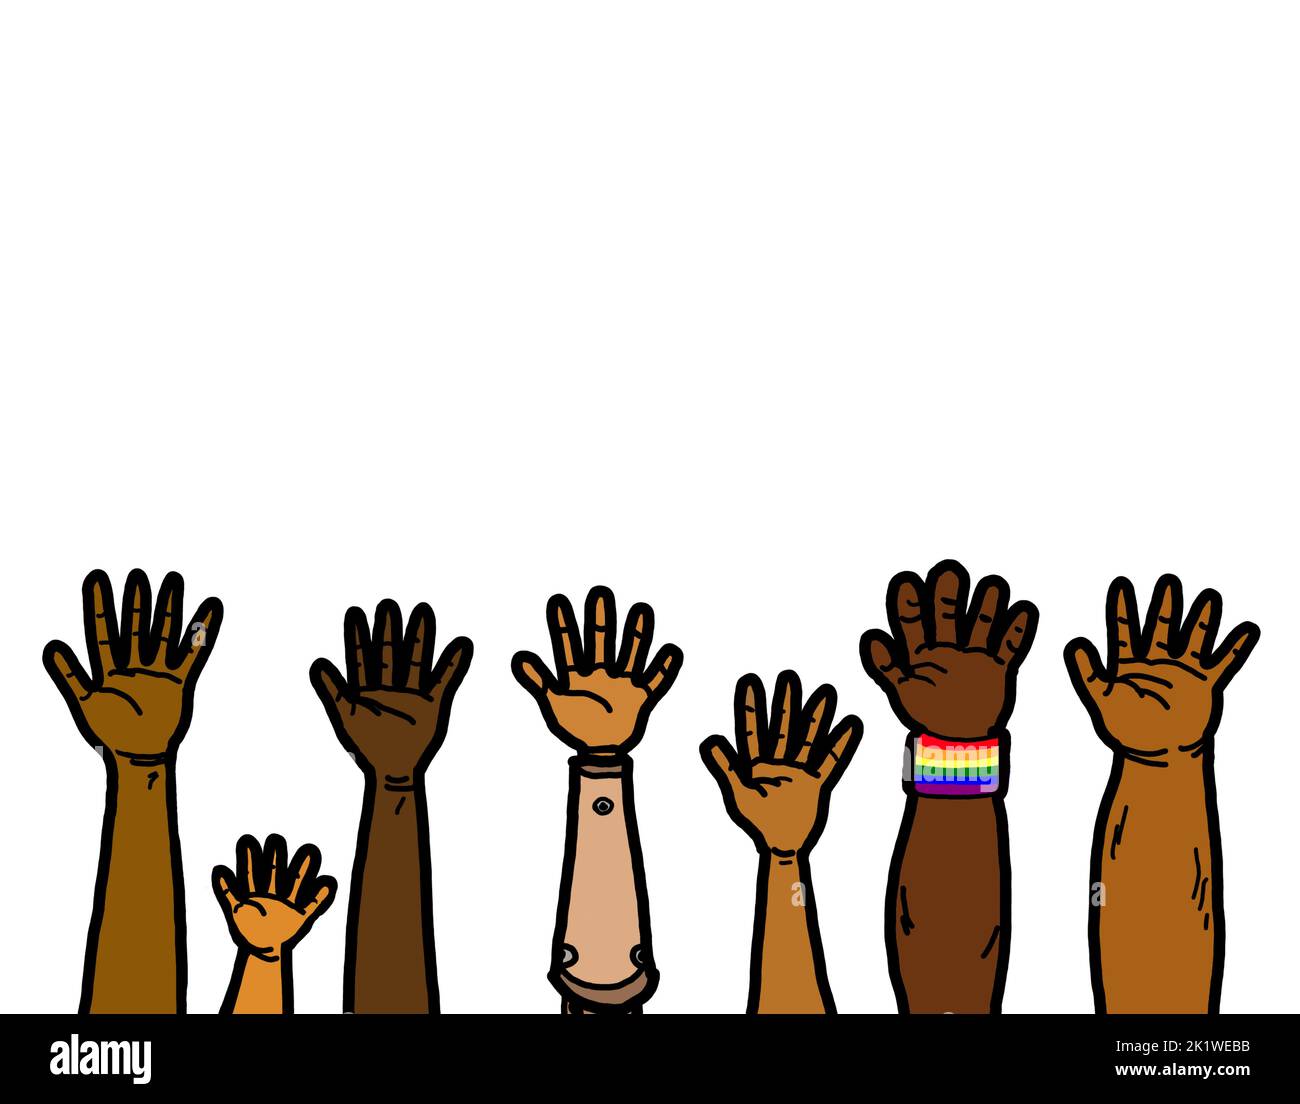 Diversity group of black African American hands raising as a symbol of equality of race, ethnicity, and people with disabilities. Stock Photo